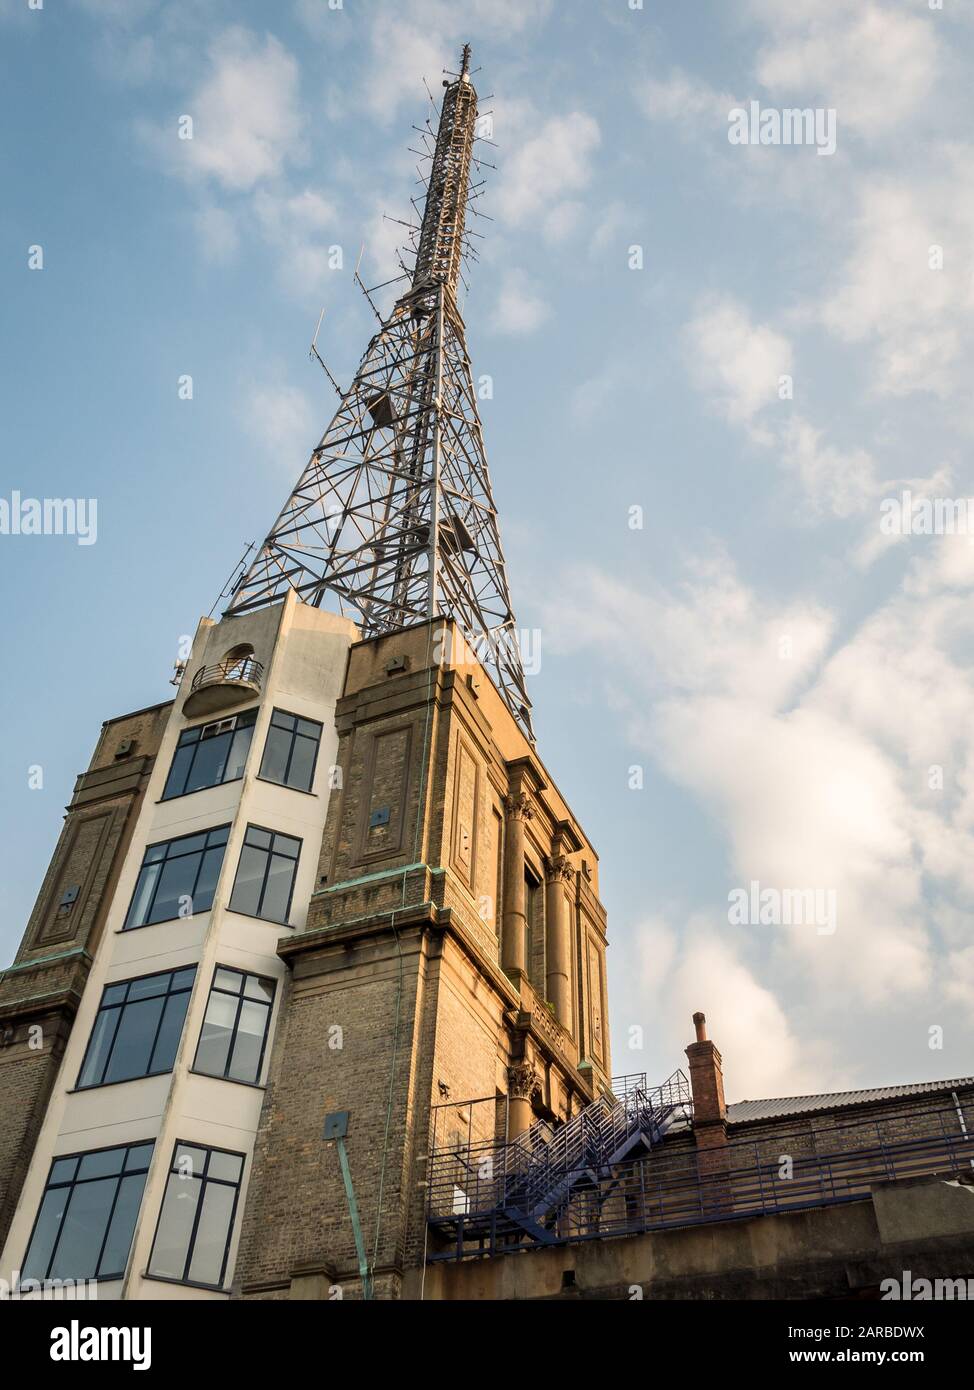 Alexandra Palace BBC TV Mast. Low angle view of the original historic analogue TV transmitter tower near Muswell Hill, North London. Stock Photo